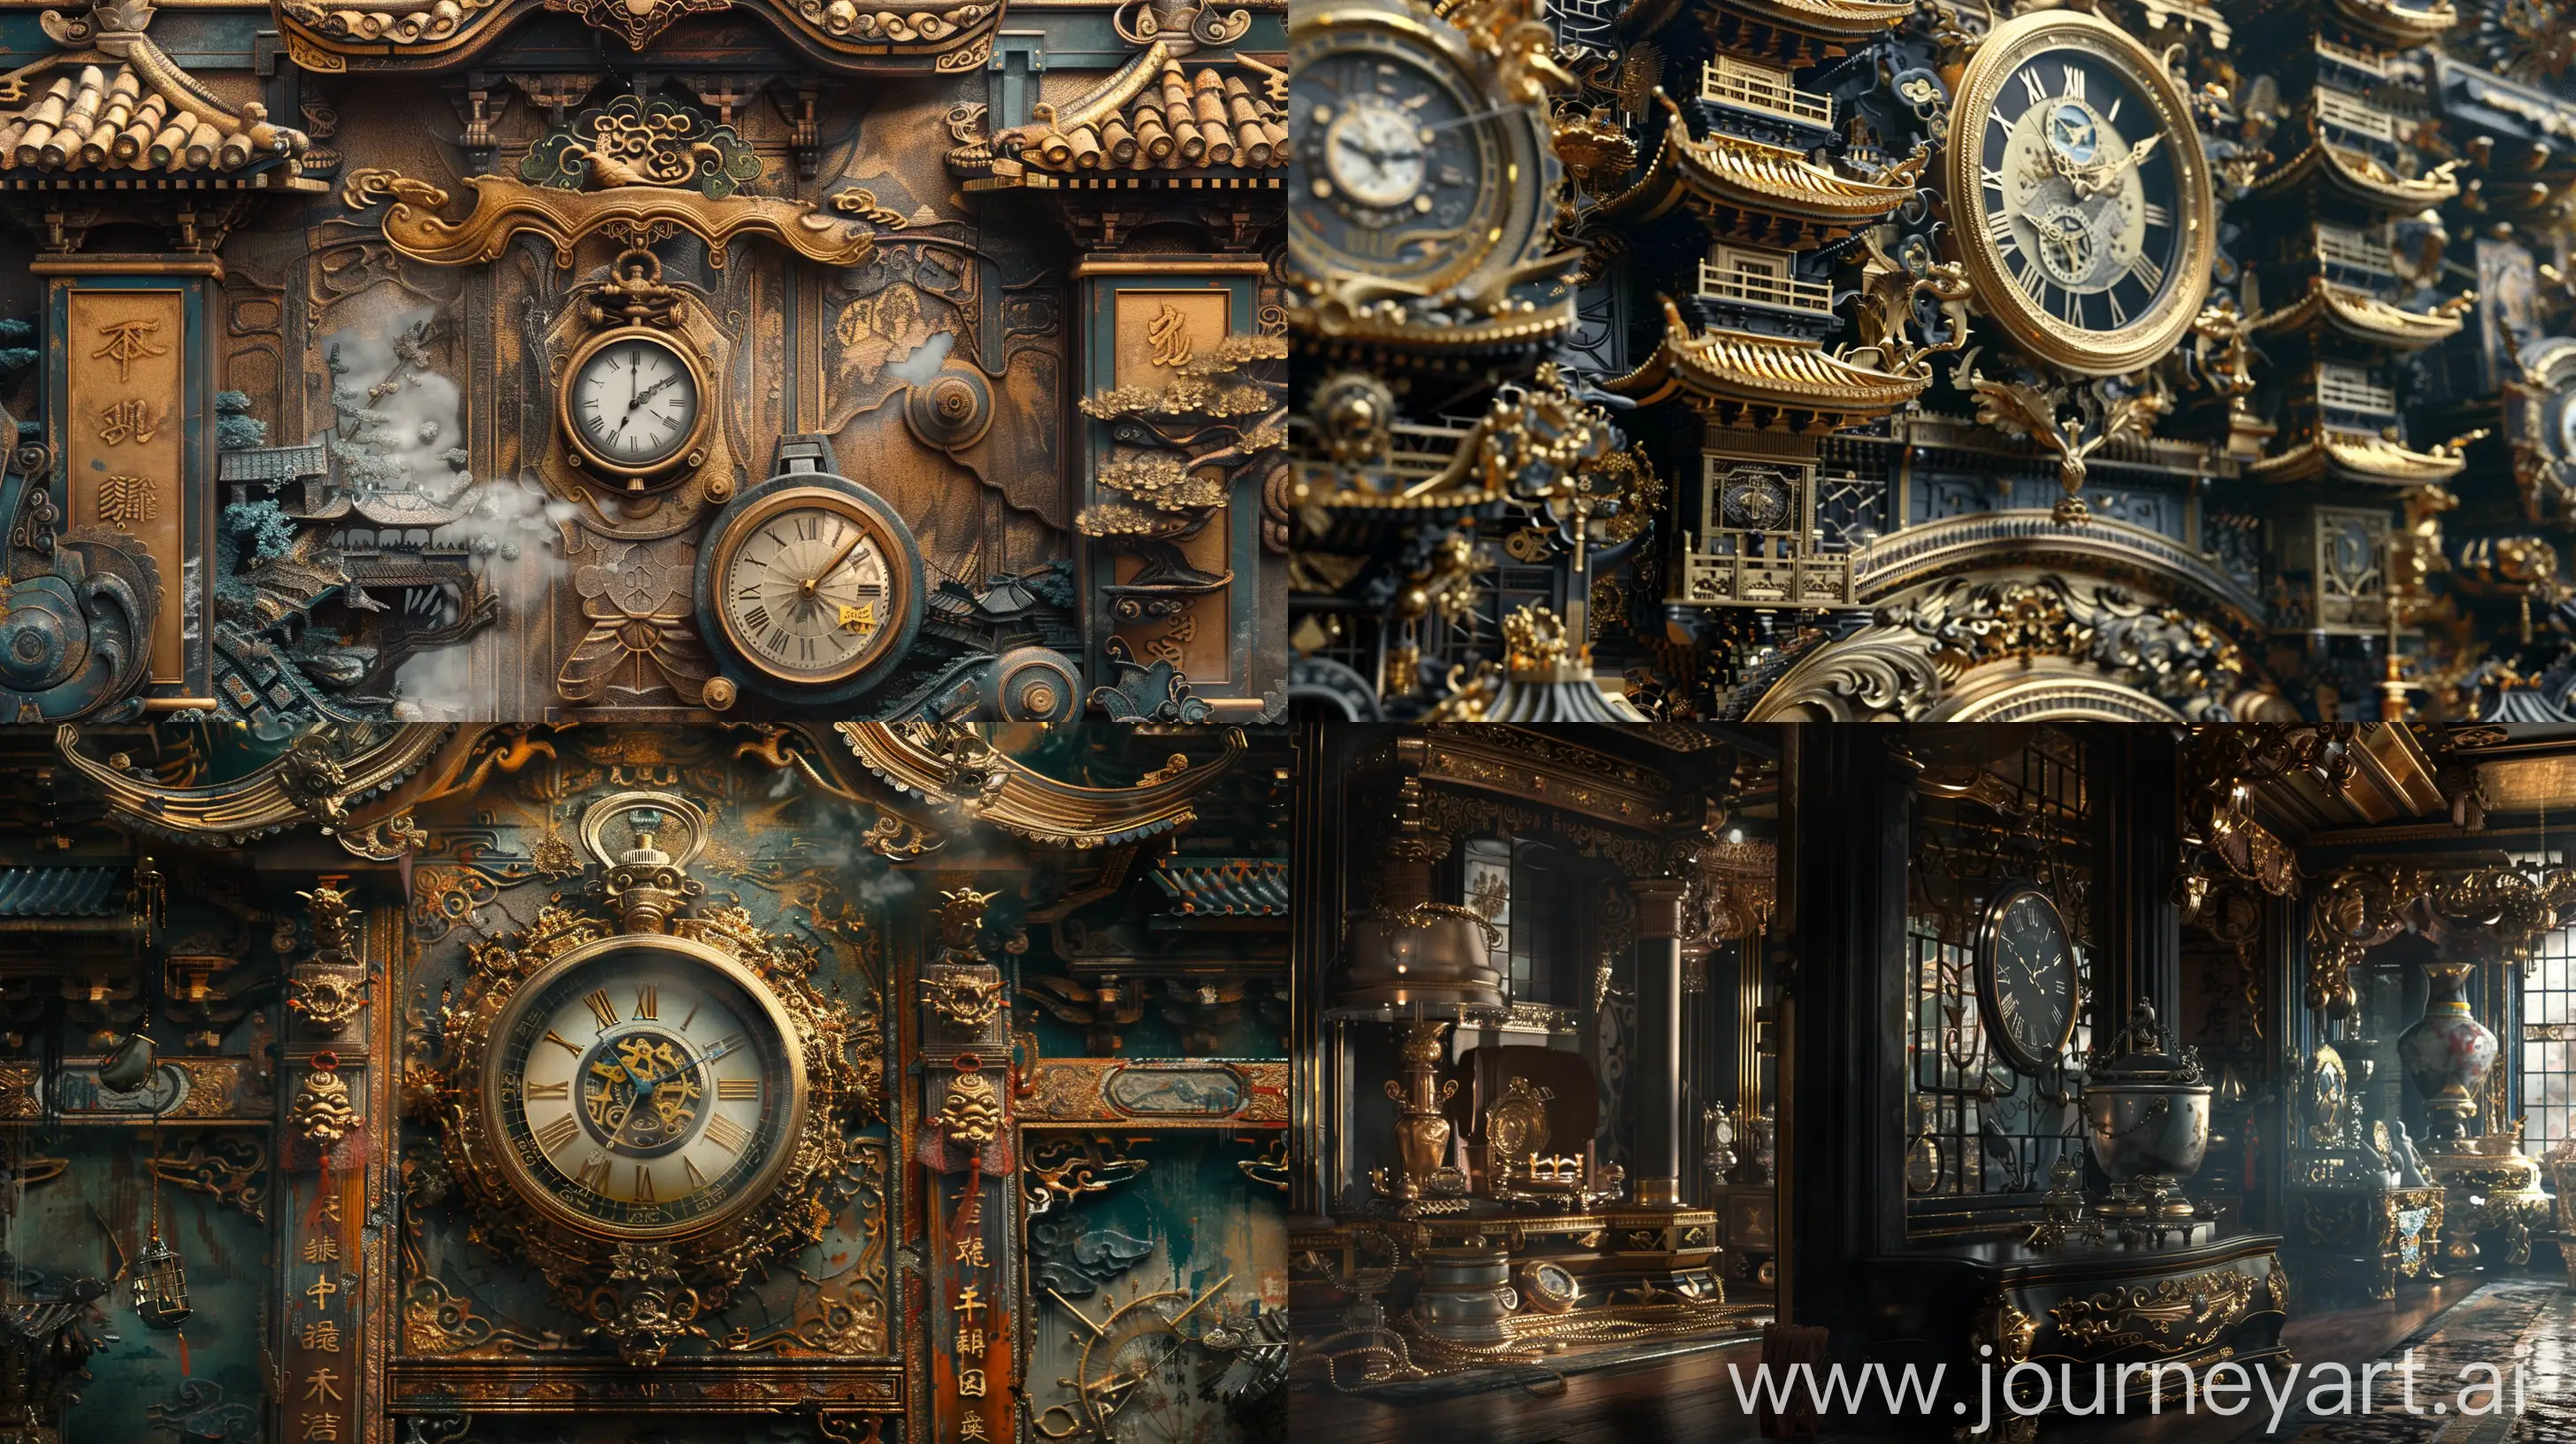 Exquisite-Painting-Detailed-Architectural-Ornaments-with-Japanese-and-Chinese-Artifacts